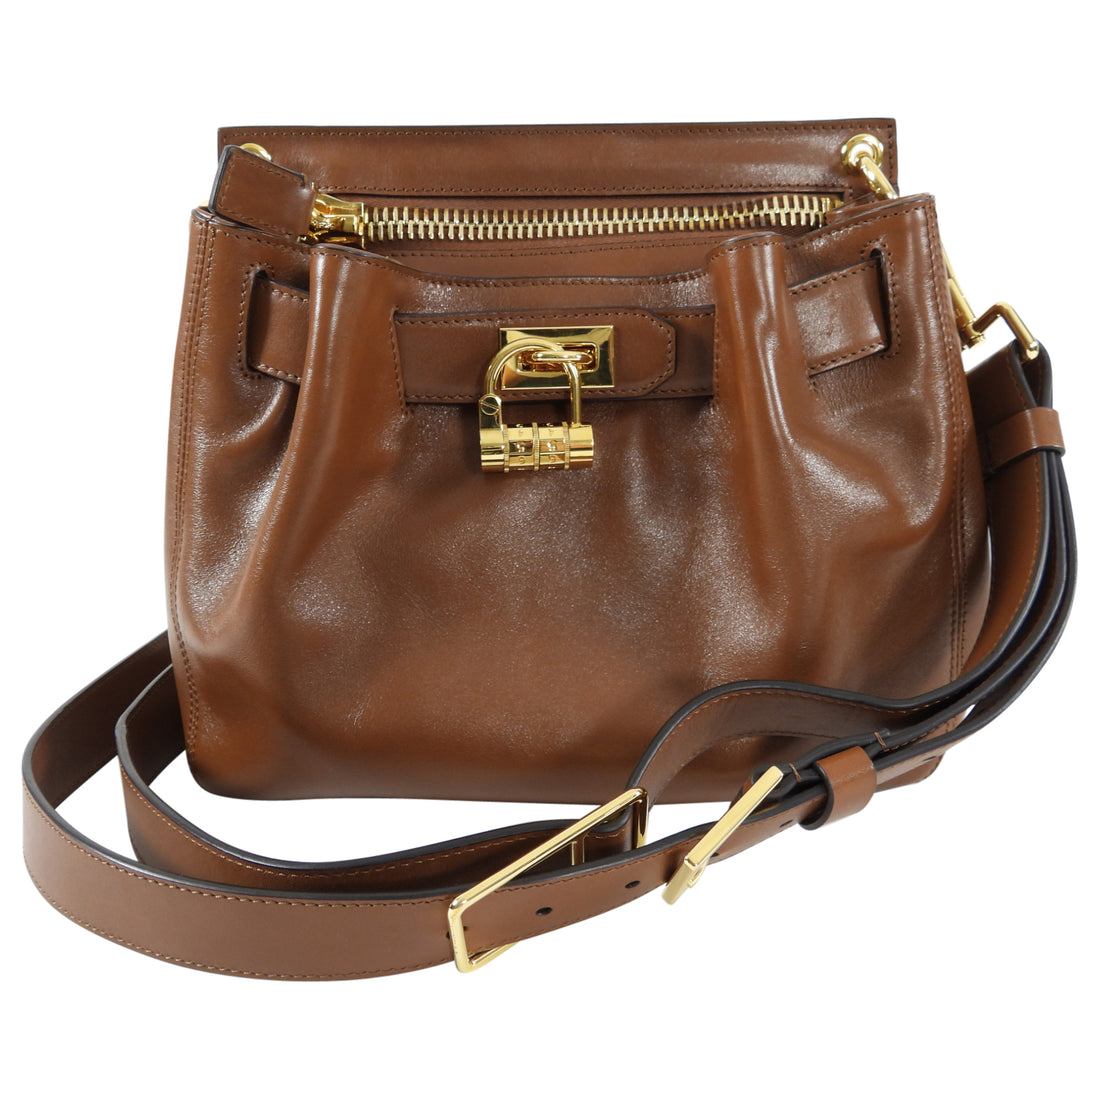 Tom Ford Cognac Smooth Leather Crossbody Bag – I MISS YOU VINTAGE